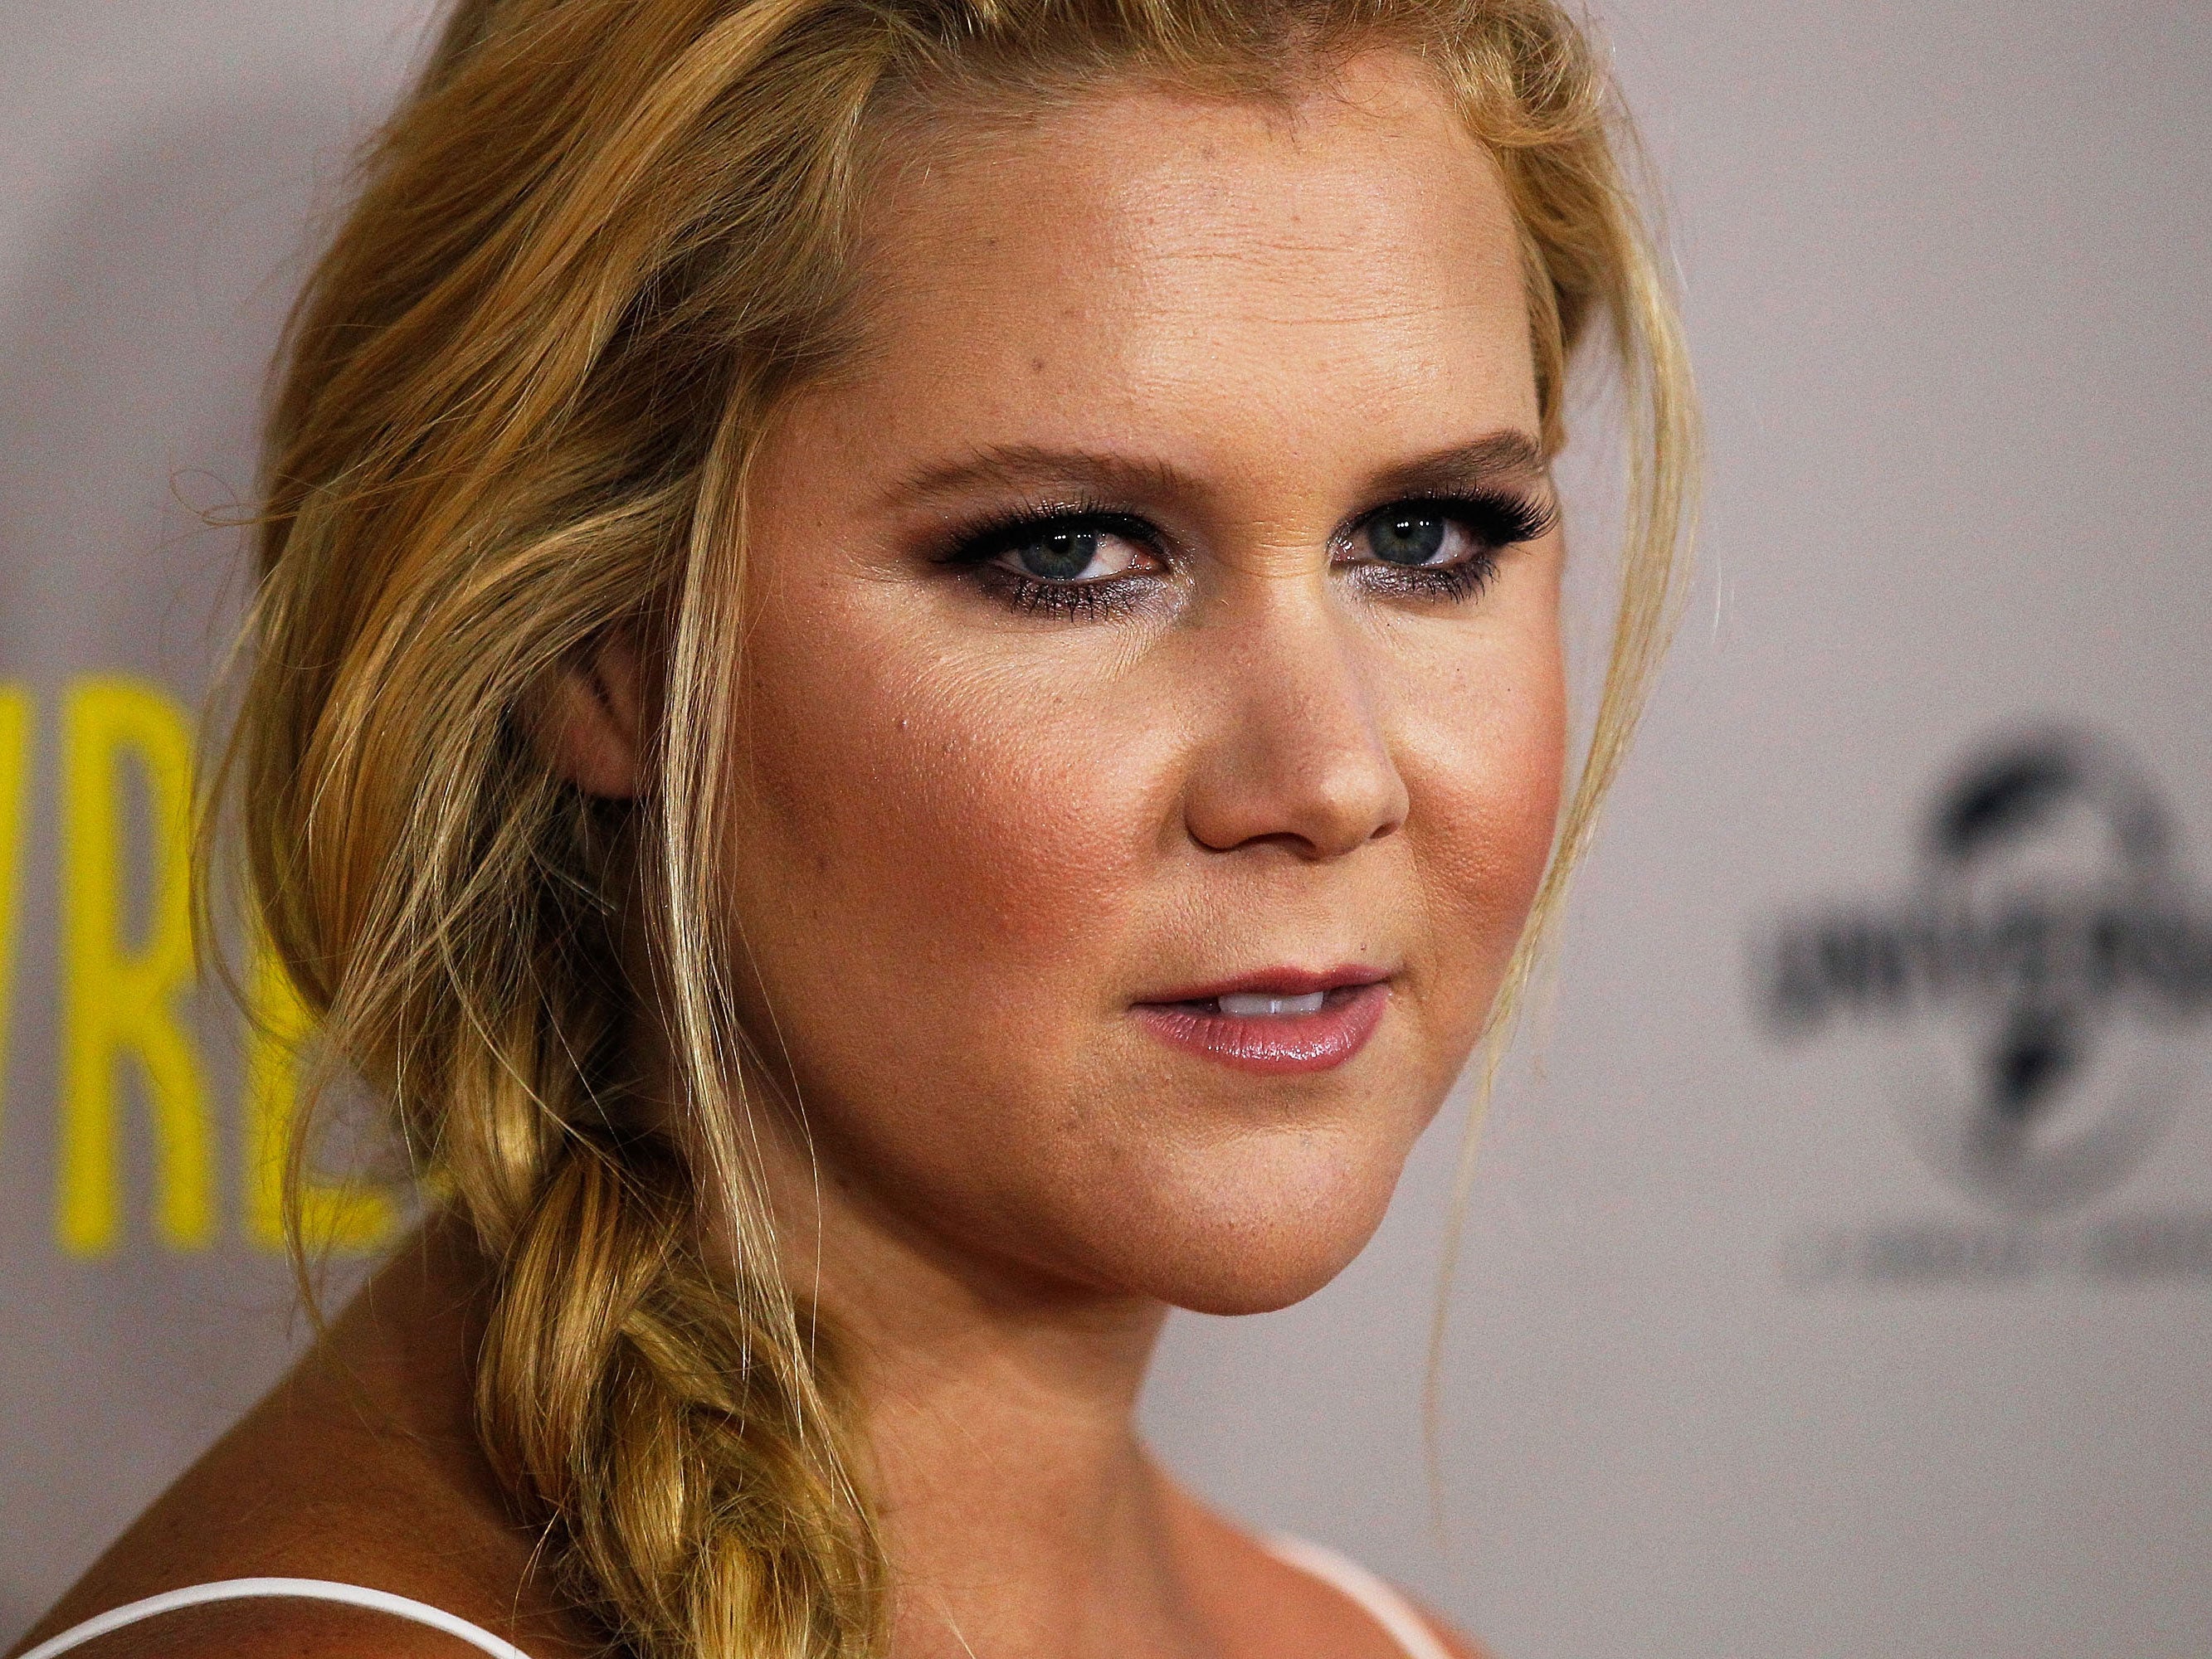 Amy Schumer sent her thoughts and prayers to Louisiana